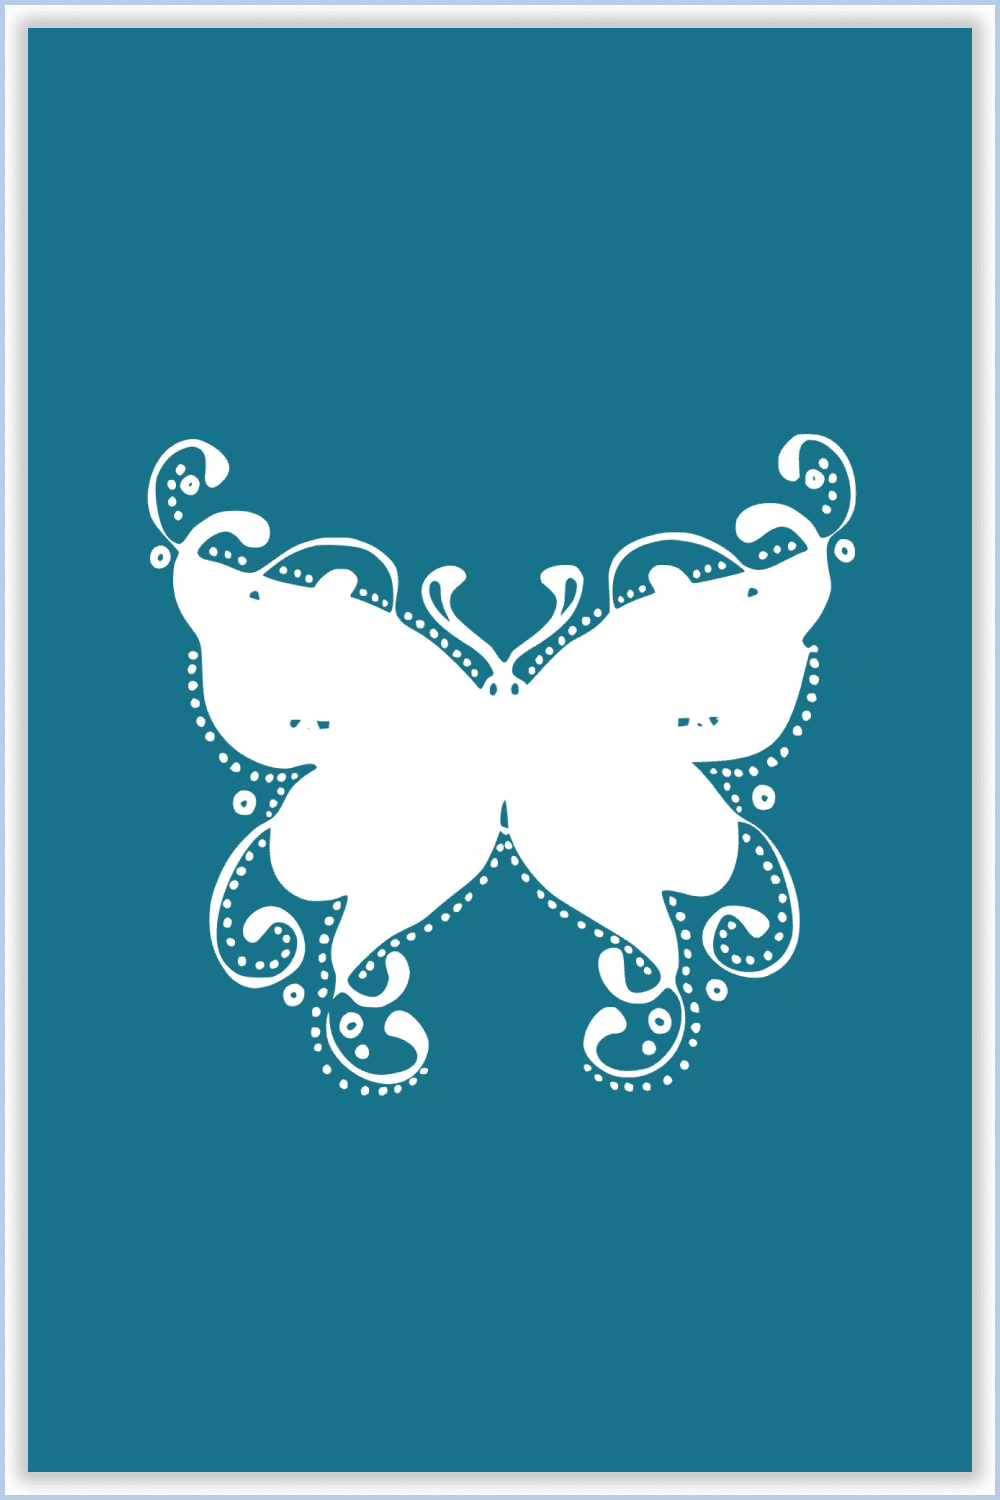 White butterfly decorated with white dots along the contour on a blue background.